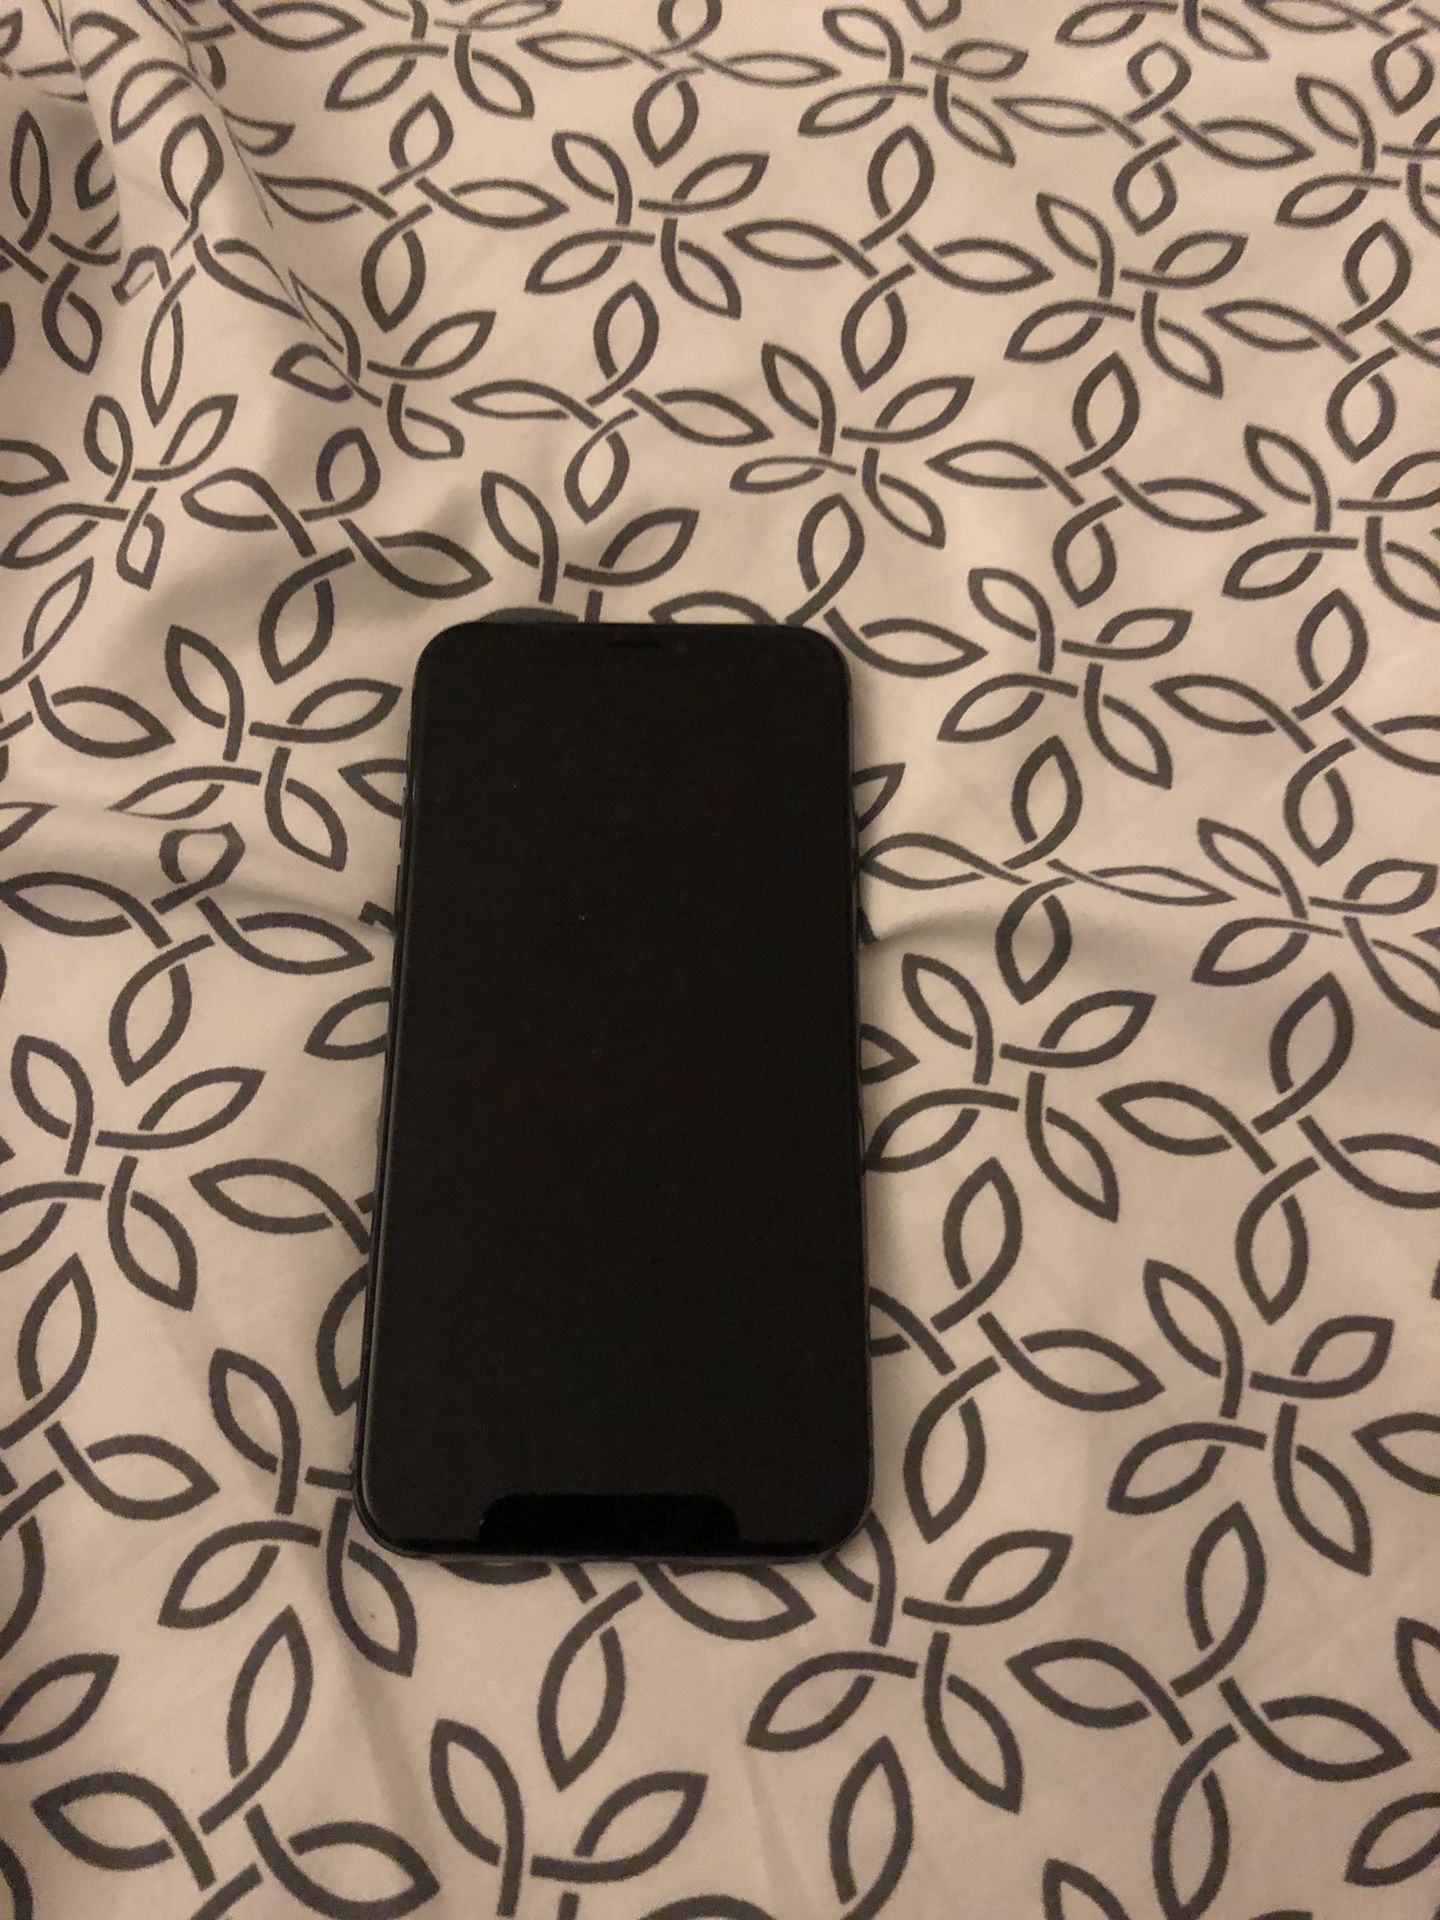 iPhone X black 256GB works w T-Mobile